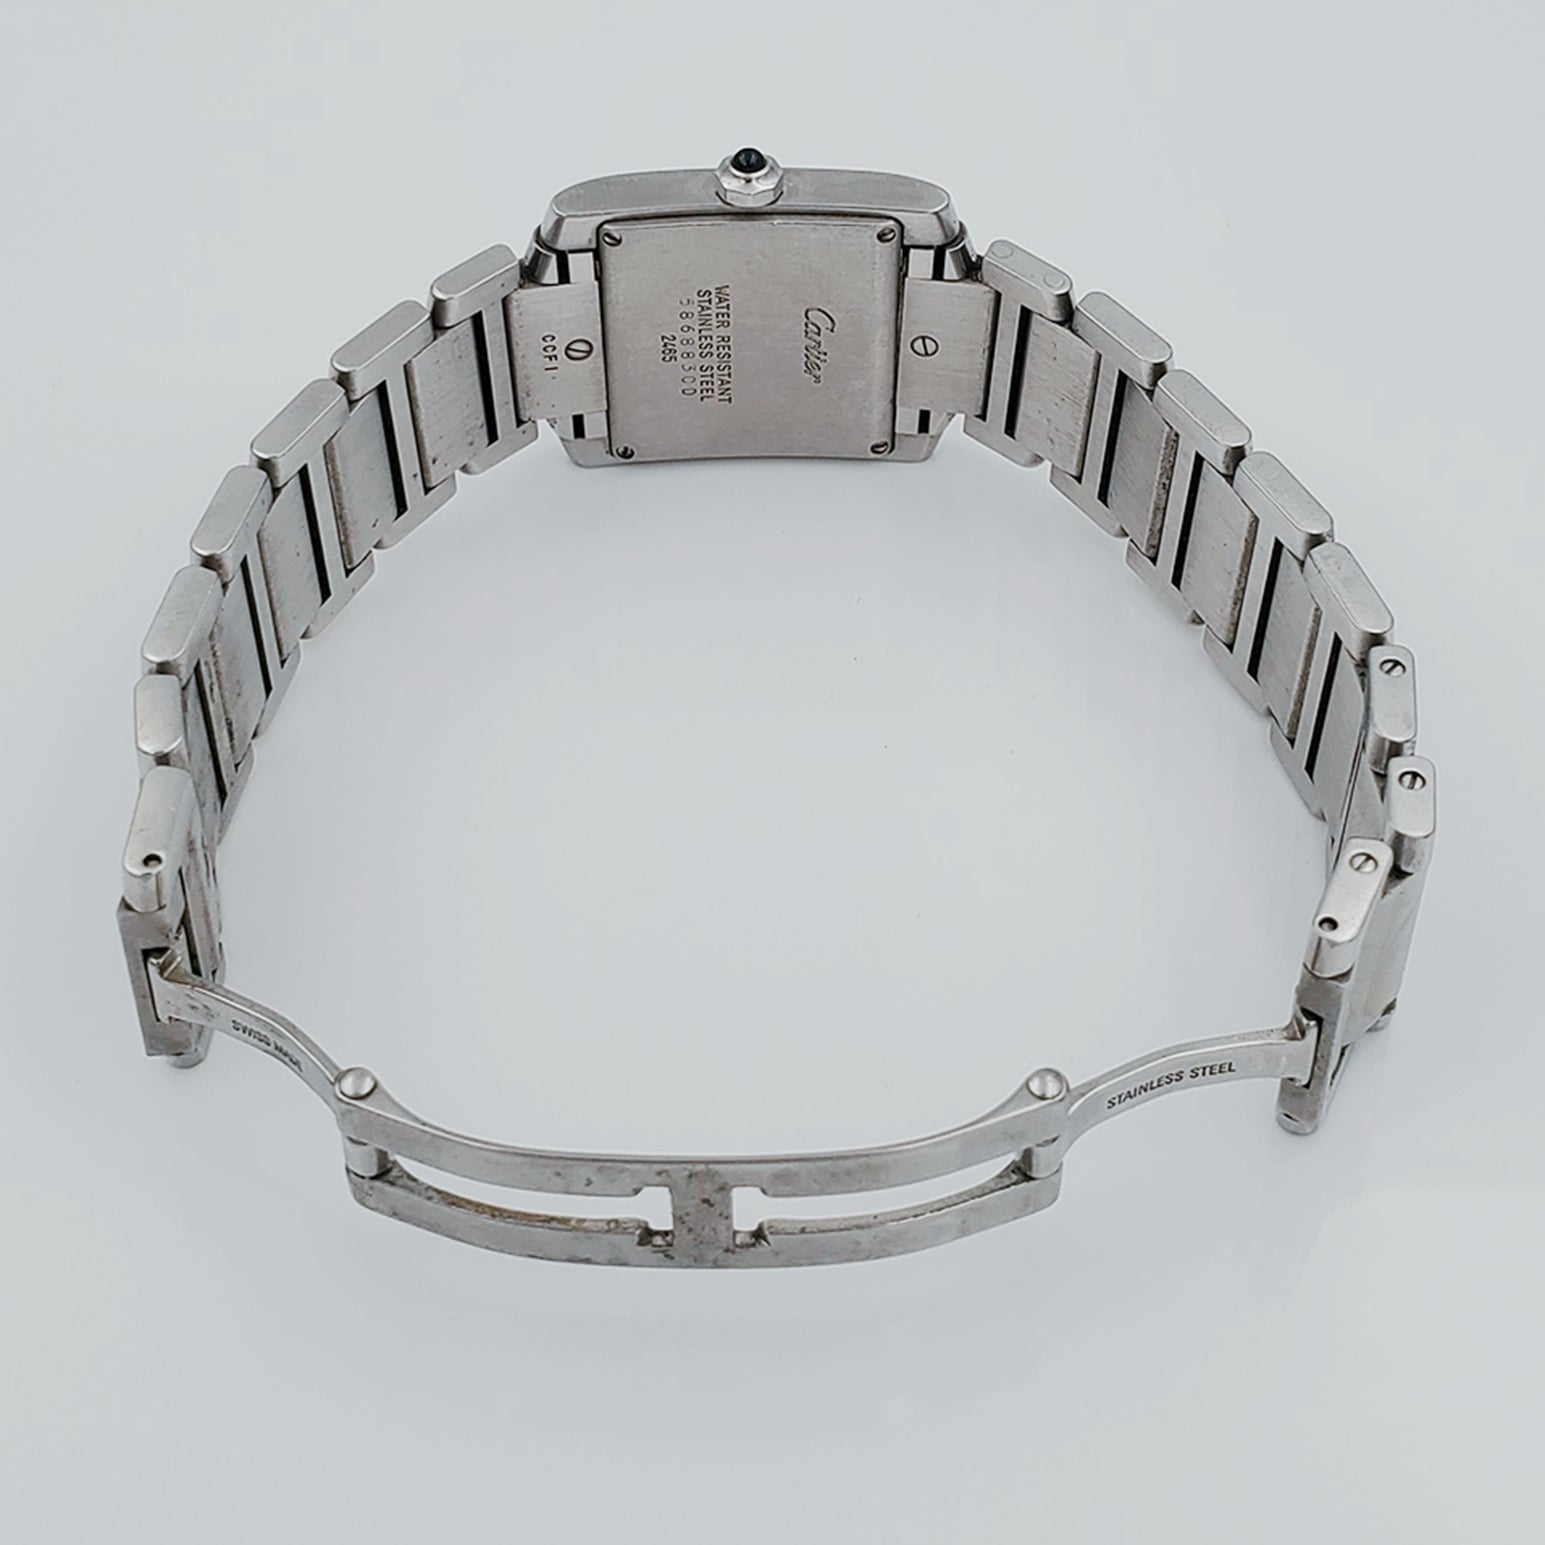 Ladies Medium Cartier 25mm Tank Francaise Stainless Steel Watch In Polished Finish. (Pre-Owned)